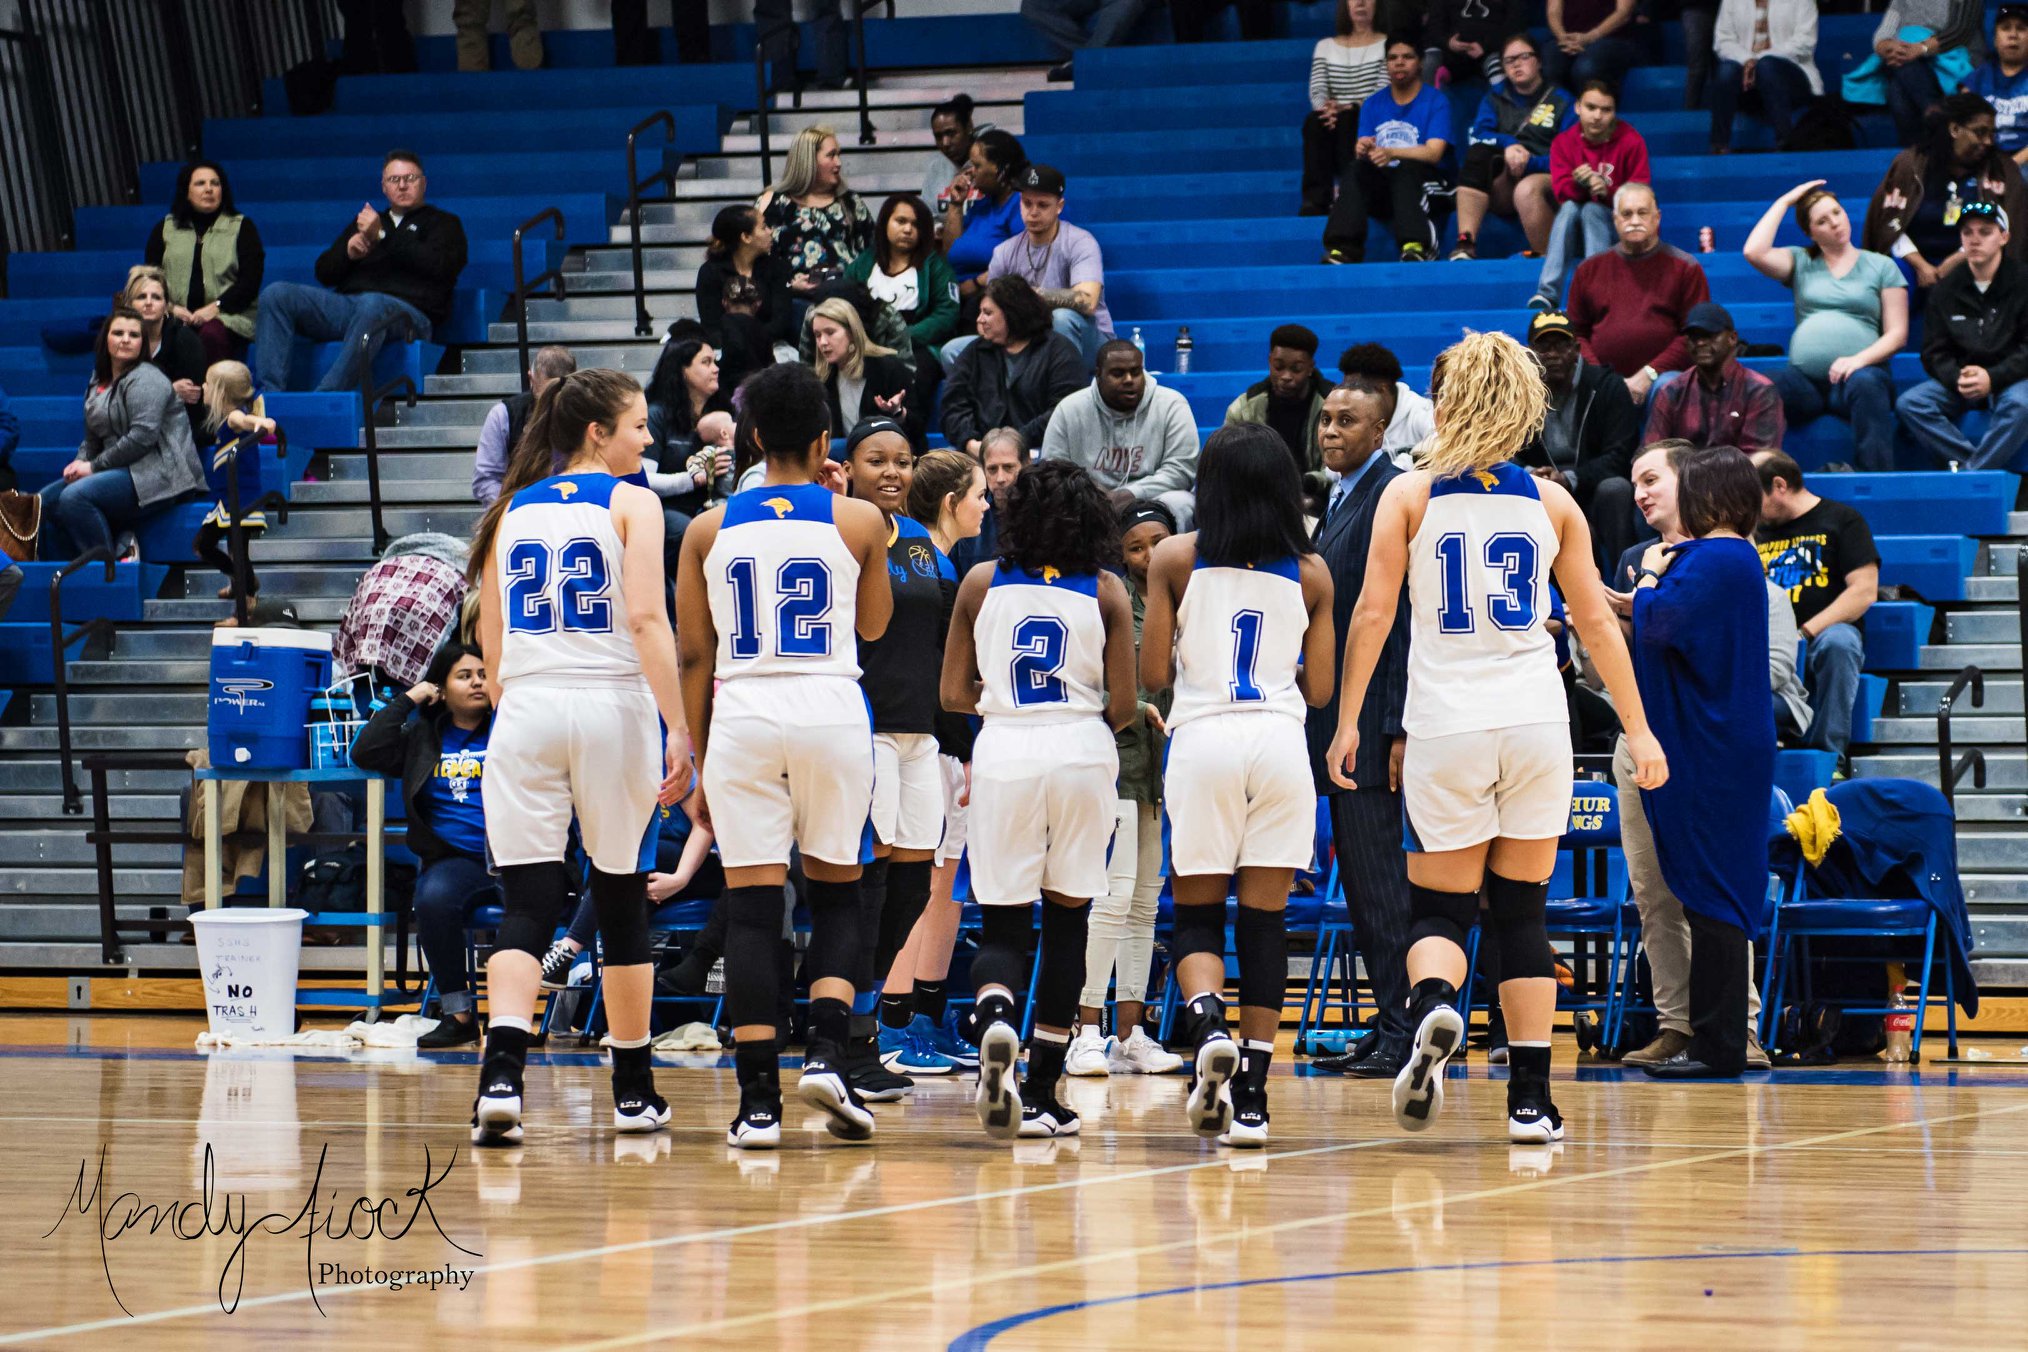 Sulphur Springs and Miller Grove Girls Basketball Teams Advance in Playoffs, Cumby Loses First Round Matchup, and Saltillo Wins Warmup Game